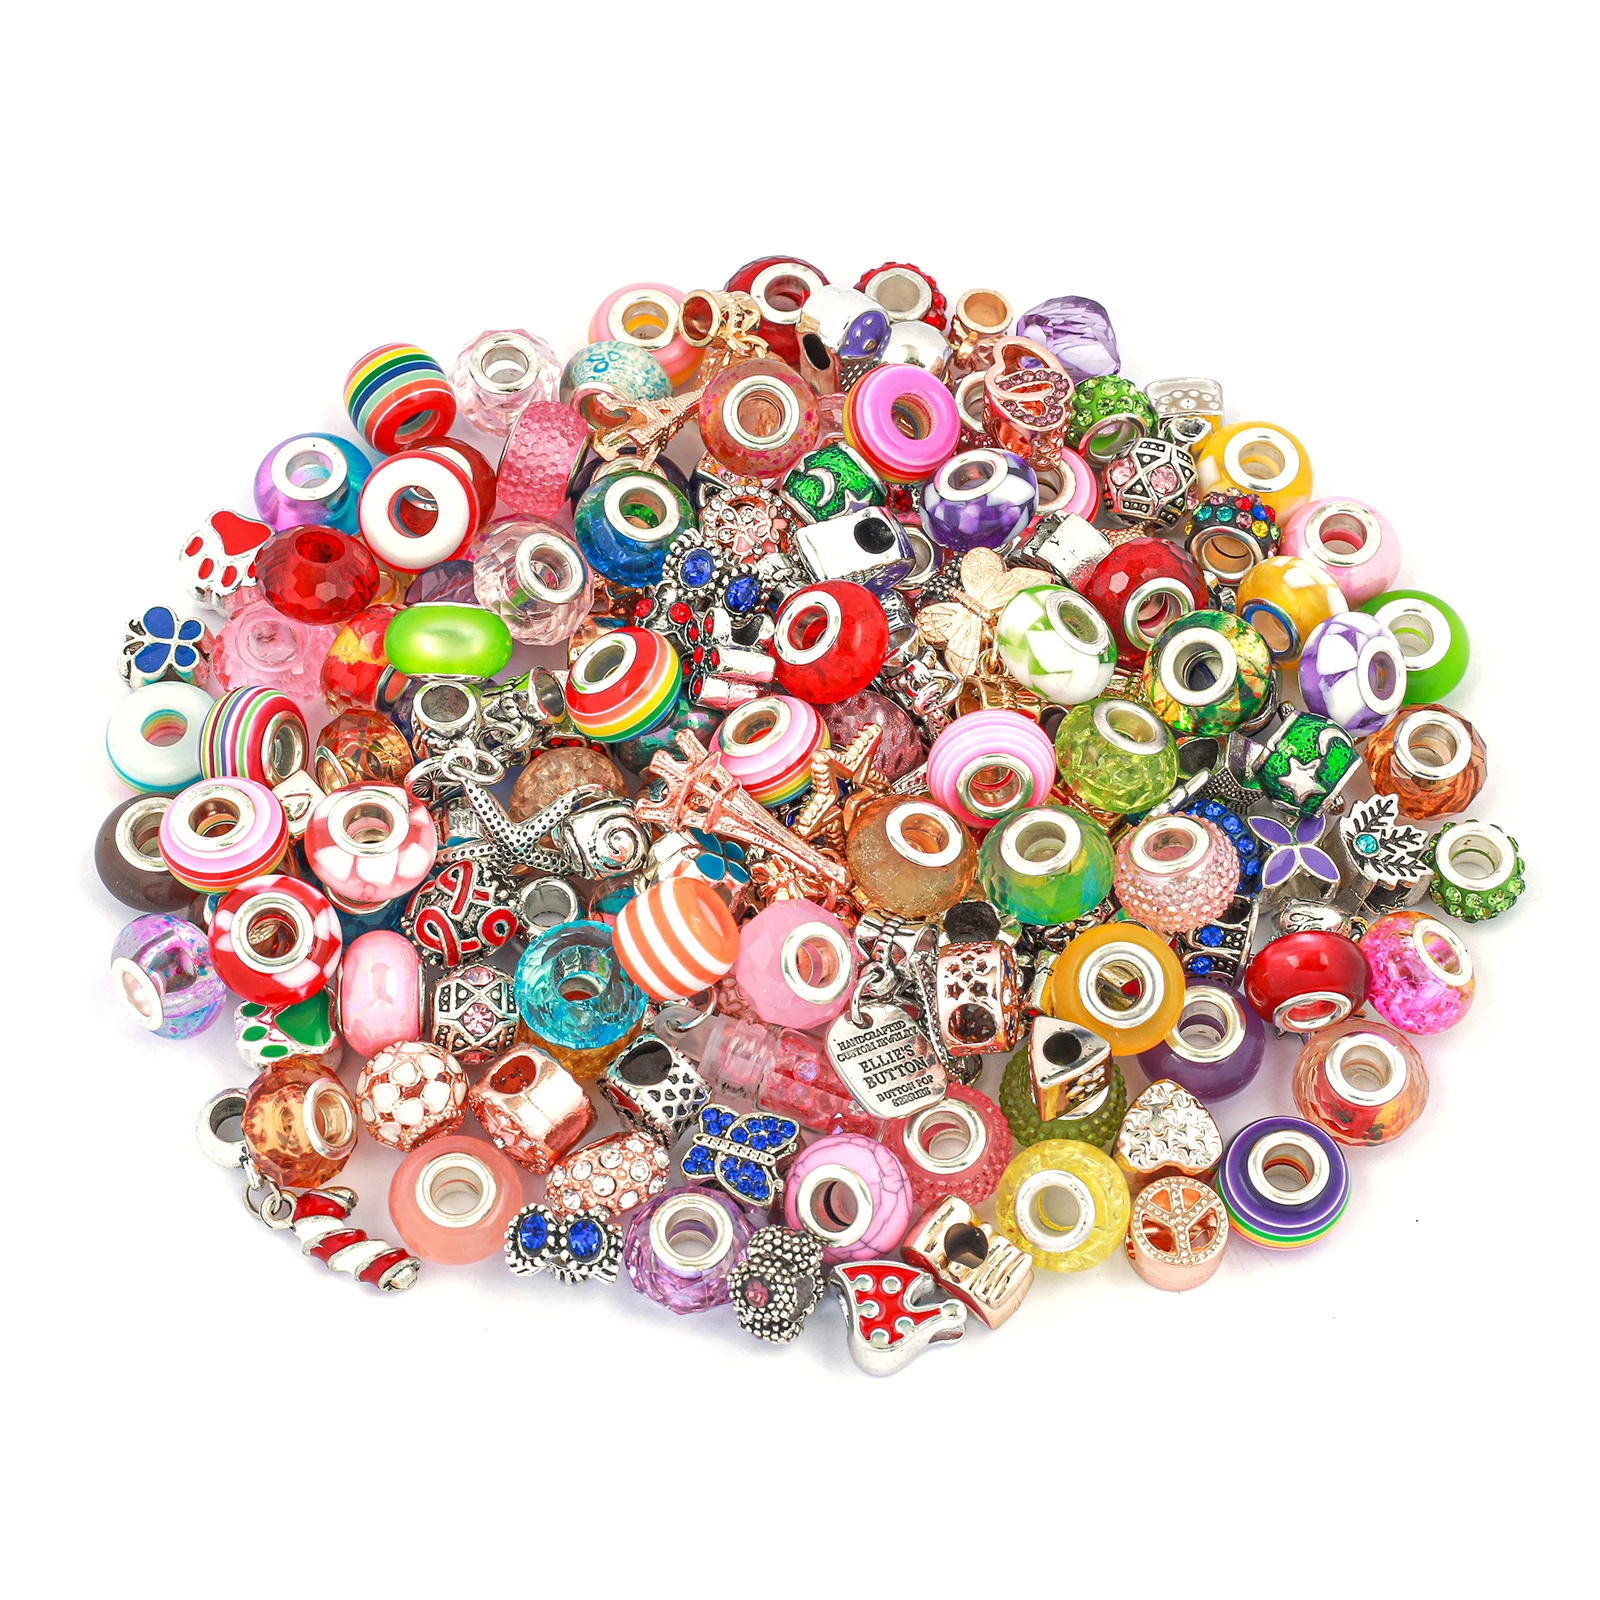 

300pcs Mixed Charms Suitable Picked at random for Women DIY Jewelry Accessories black friday sale